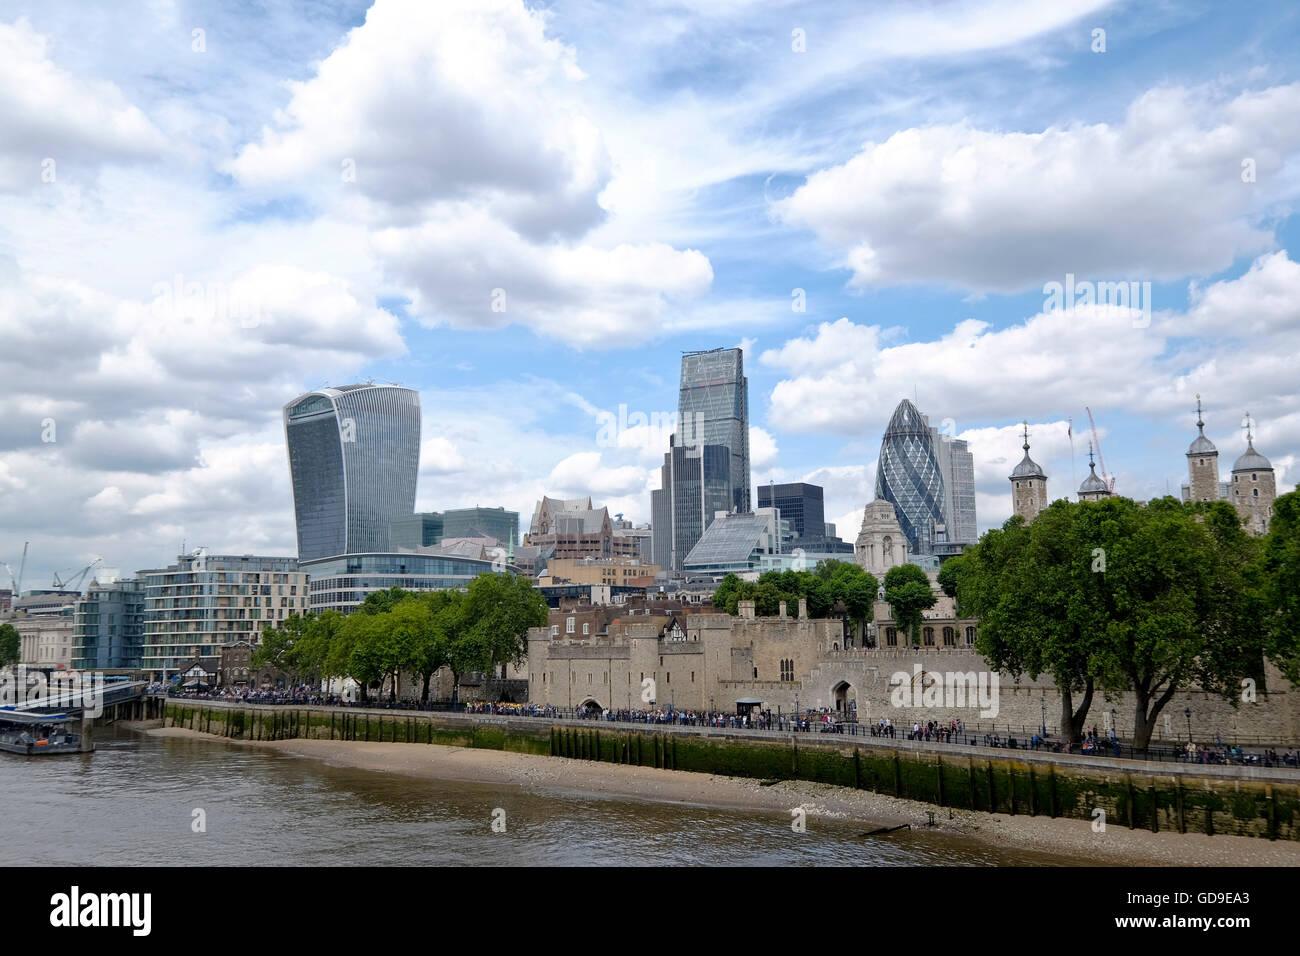 The London skyline with 'The Walkie Talkie' 'The Gherkin' and 'The Cheese Grater' London landmark taken from Tower Bridge London over the Thames River Stock Photo